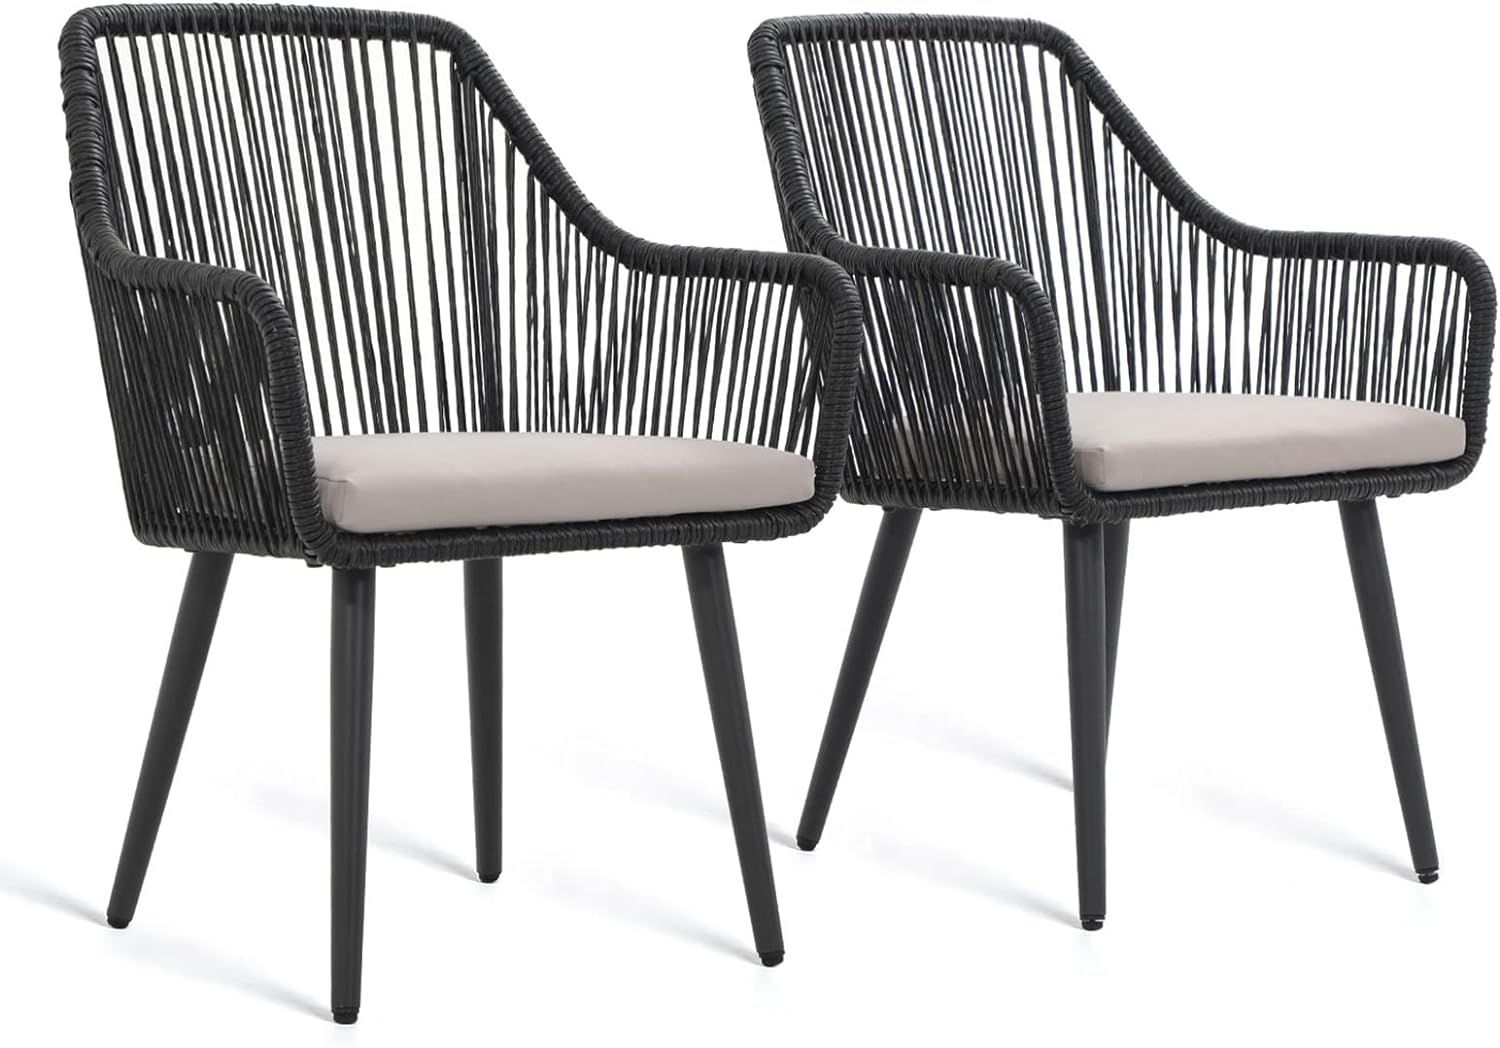 JOIVI Patio Dining Chairs Set of 2, Outdoor Rattan Chairs with Armrest and Cushions for Outside L... | Amazon (US)